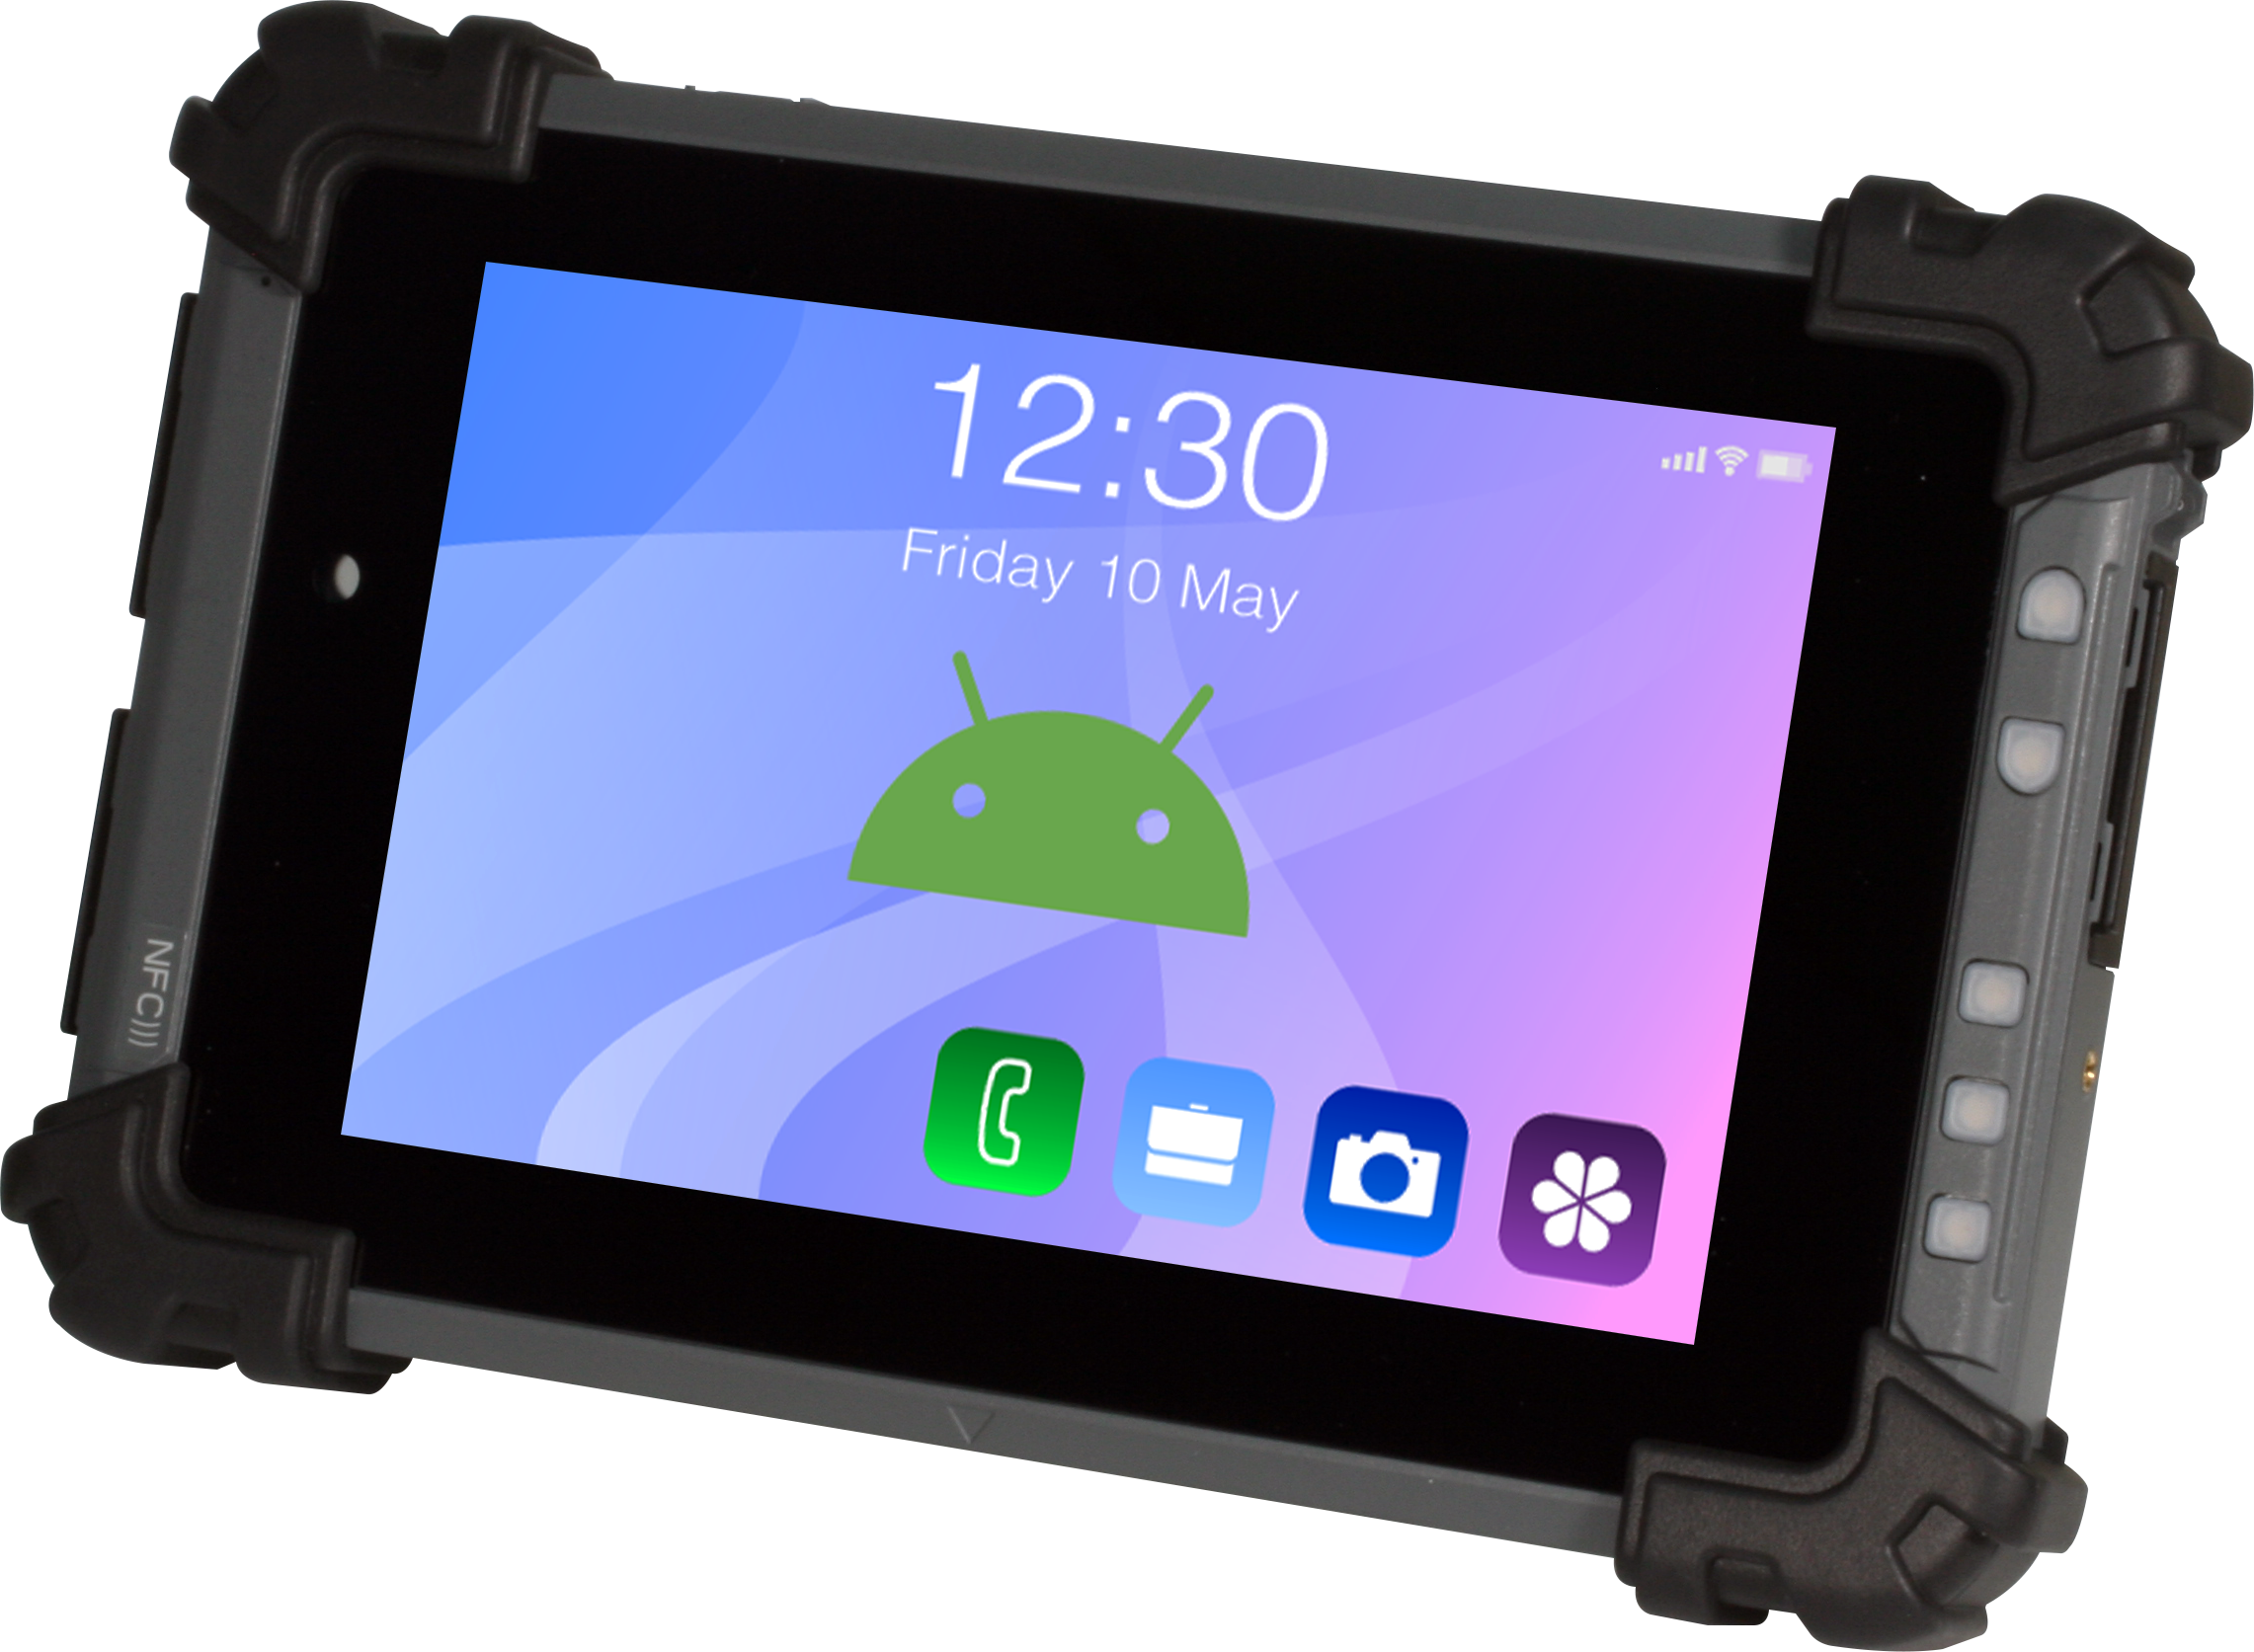 The RTC-710RK: The Better Performing, Longer Lasting Rugged 7” Tablet